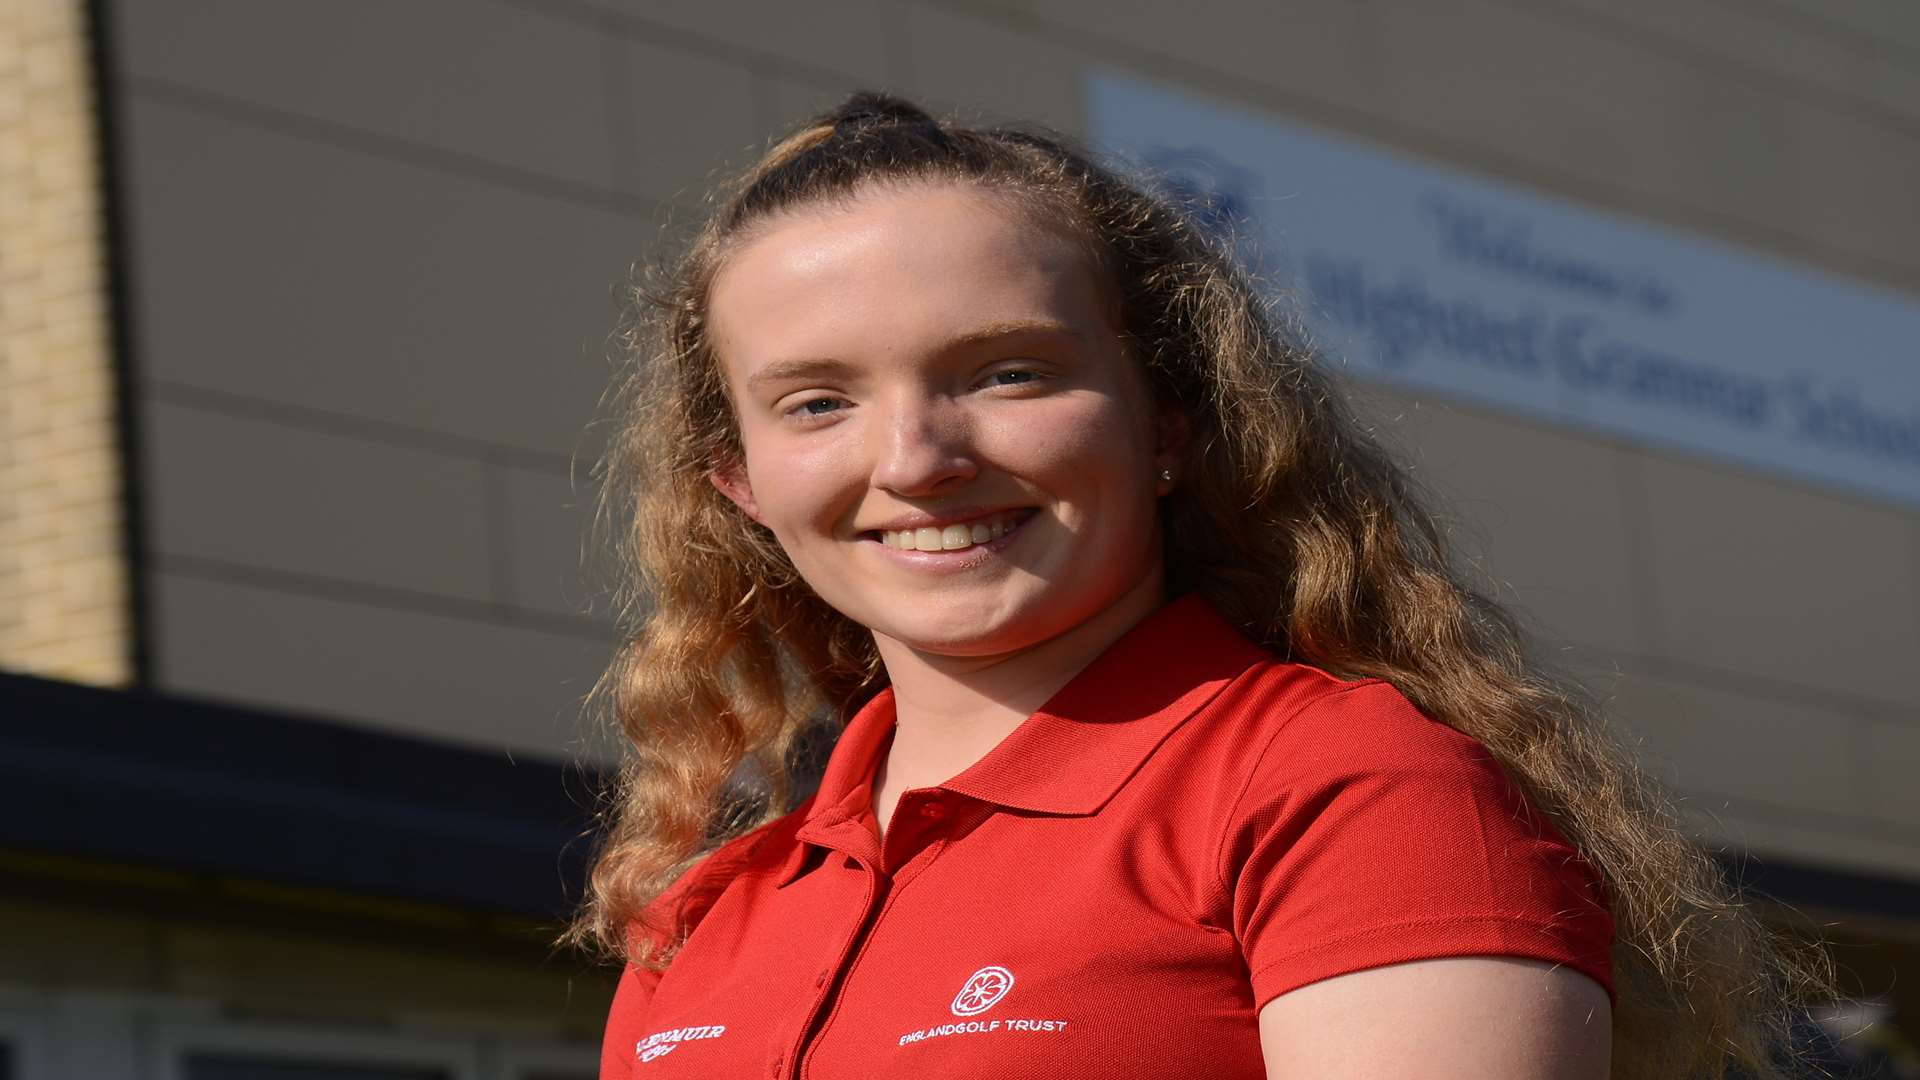 Nicola Smith who has won a scholarship to a US university with her golfing skills